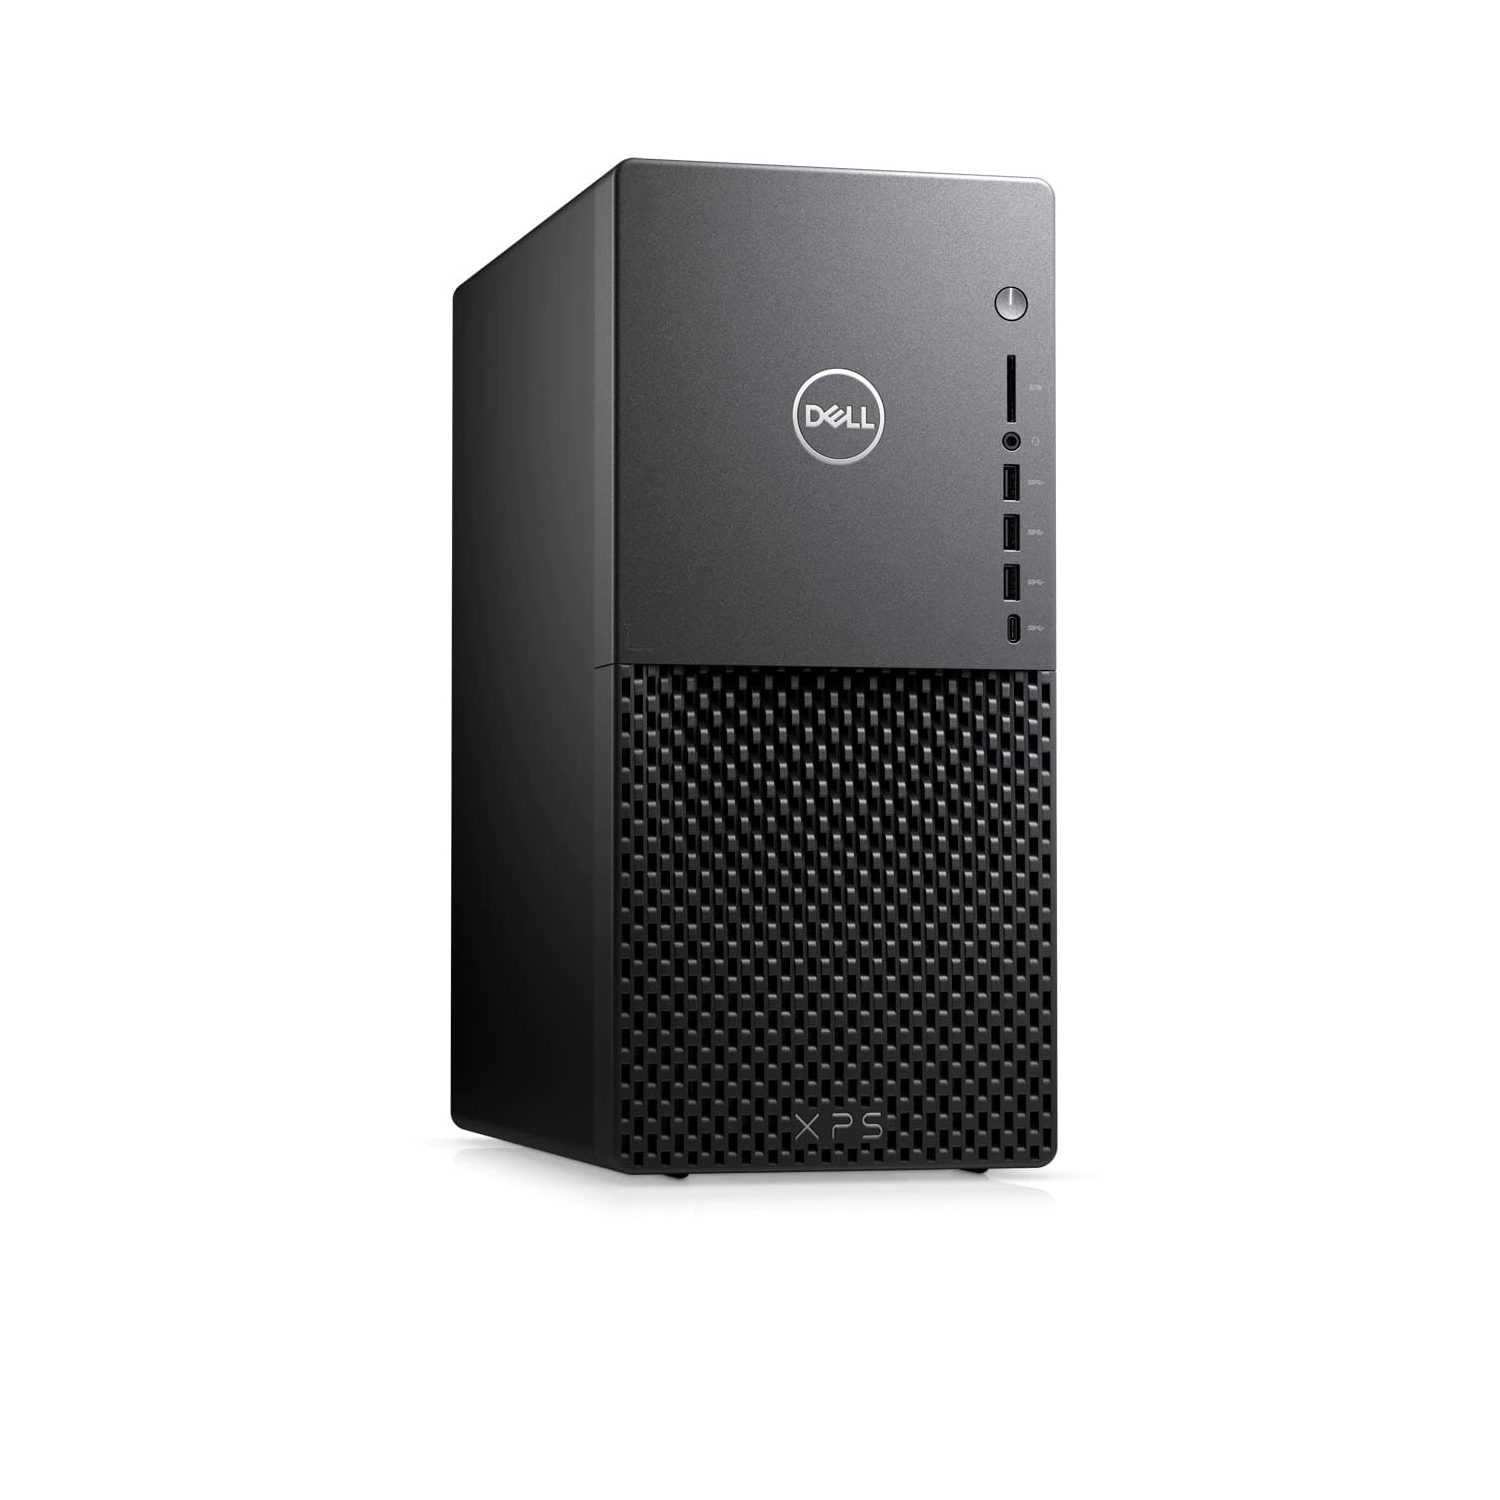 Refurbished (Excellent) - Dell XPS 8940 Desktop (2020) | Core i3 - 1TB HDD - 16GB RAM | 8 Cores @ 4.4 GHz - 10th Gen CPU Certified Refurbished